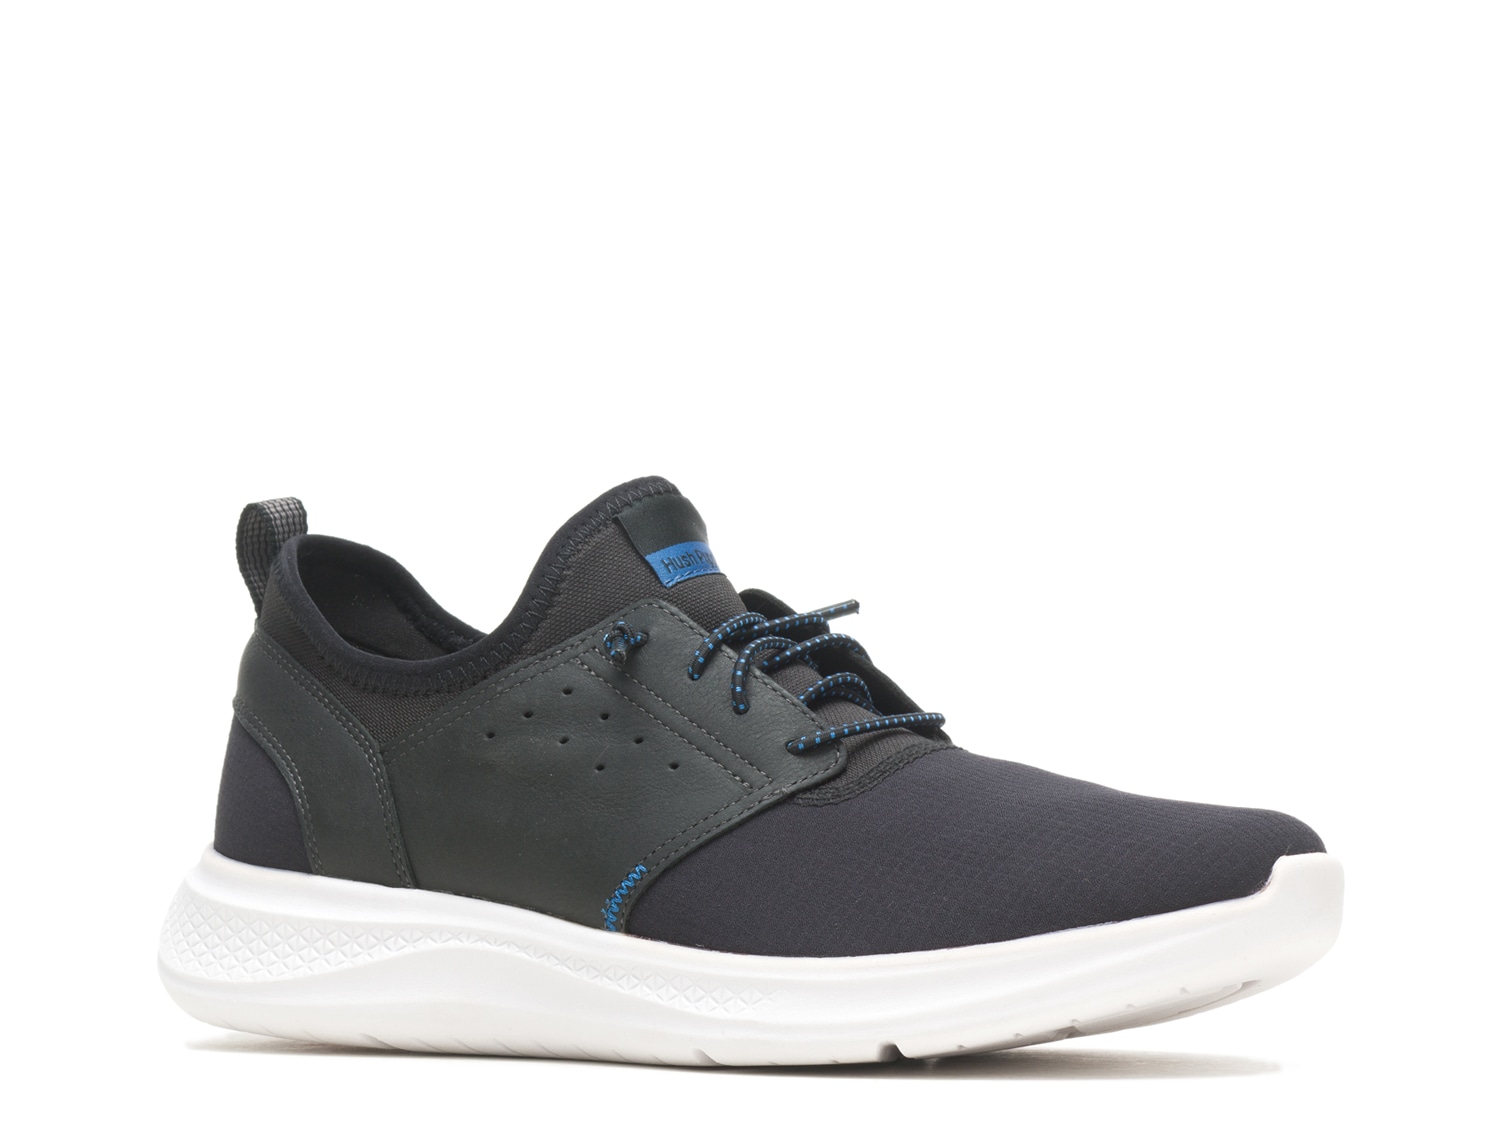 Hush Puppies Elevate Sneaker - Men's - Free Shipping | DSW